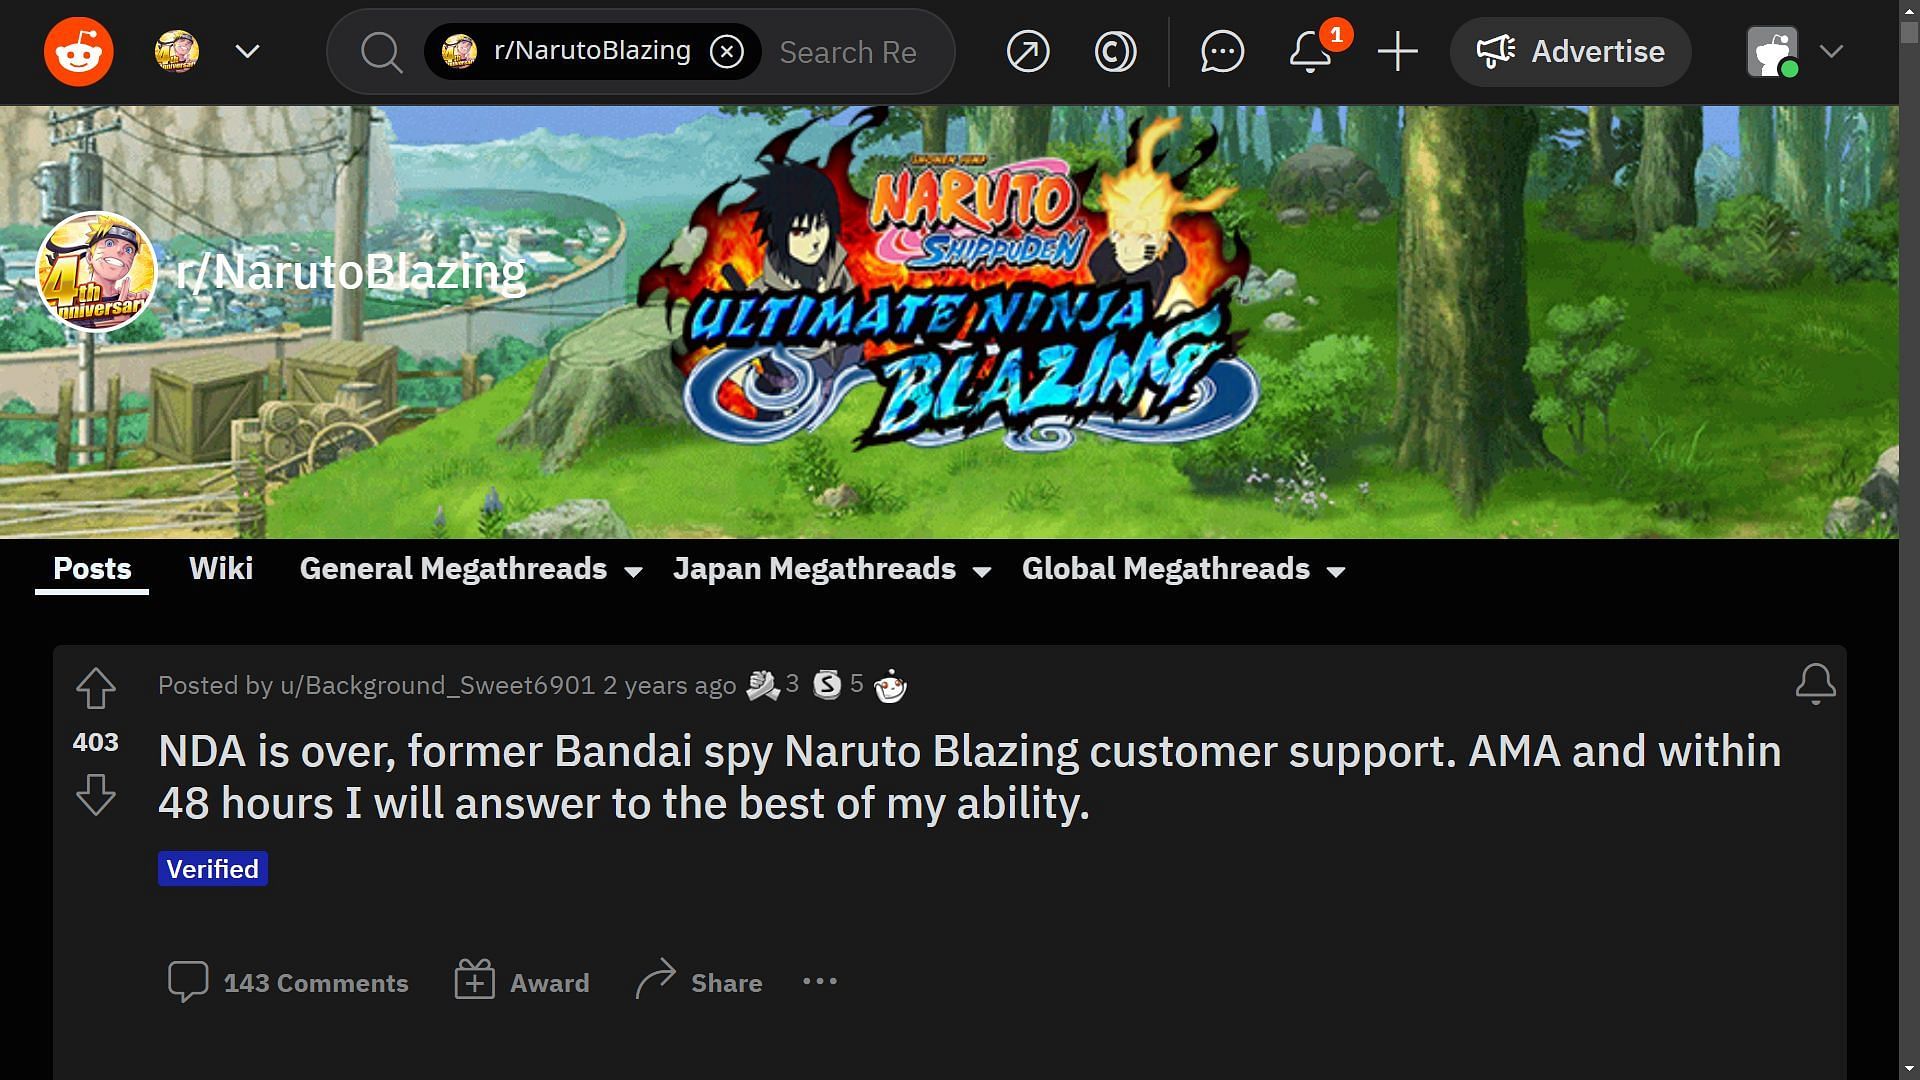 Image of the post made by an employee who worked in the customer support (Screengrabvia Reddit thread r/NarutoBlazing)